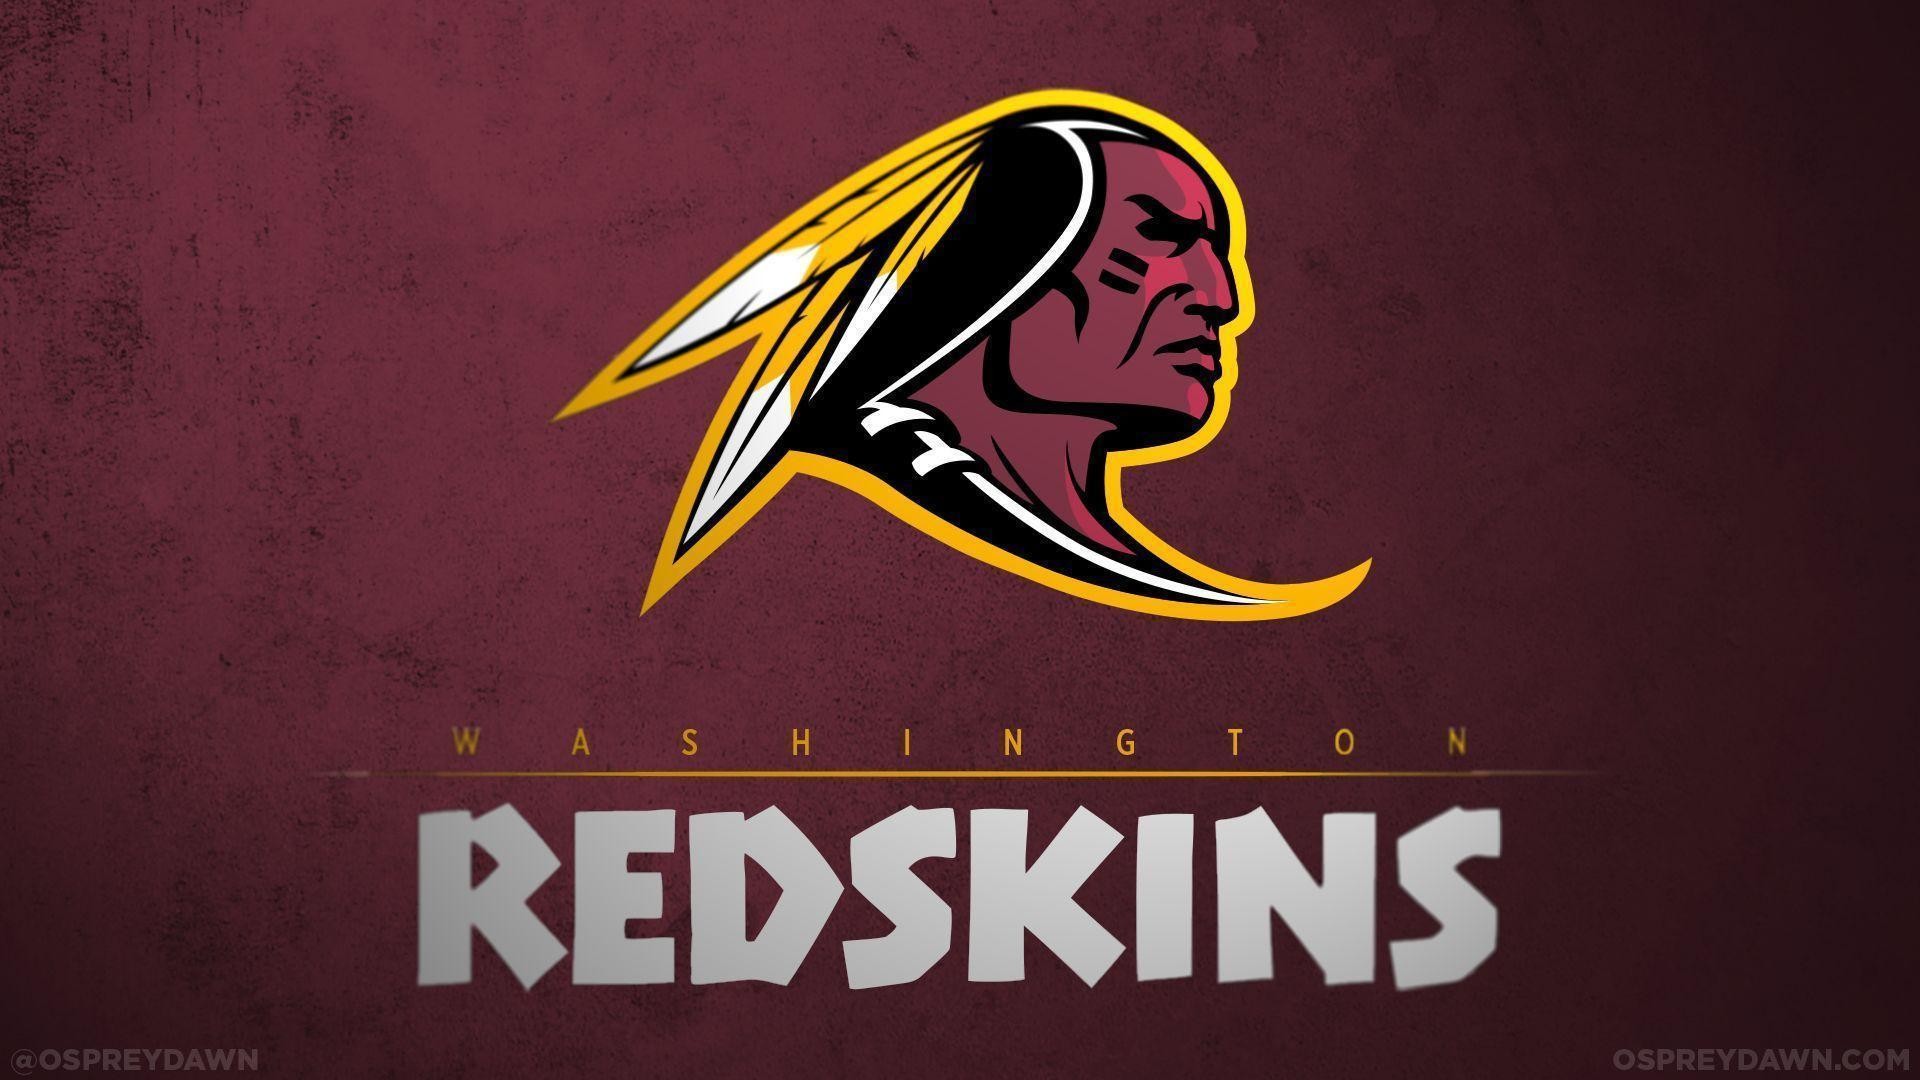 1920x1080 Redskins Wallpapers 2015 - Wallpaper Cave